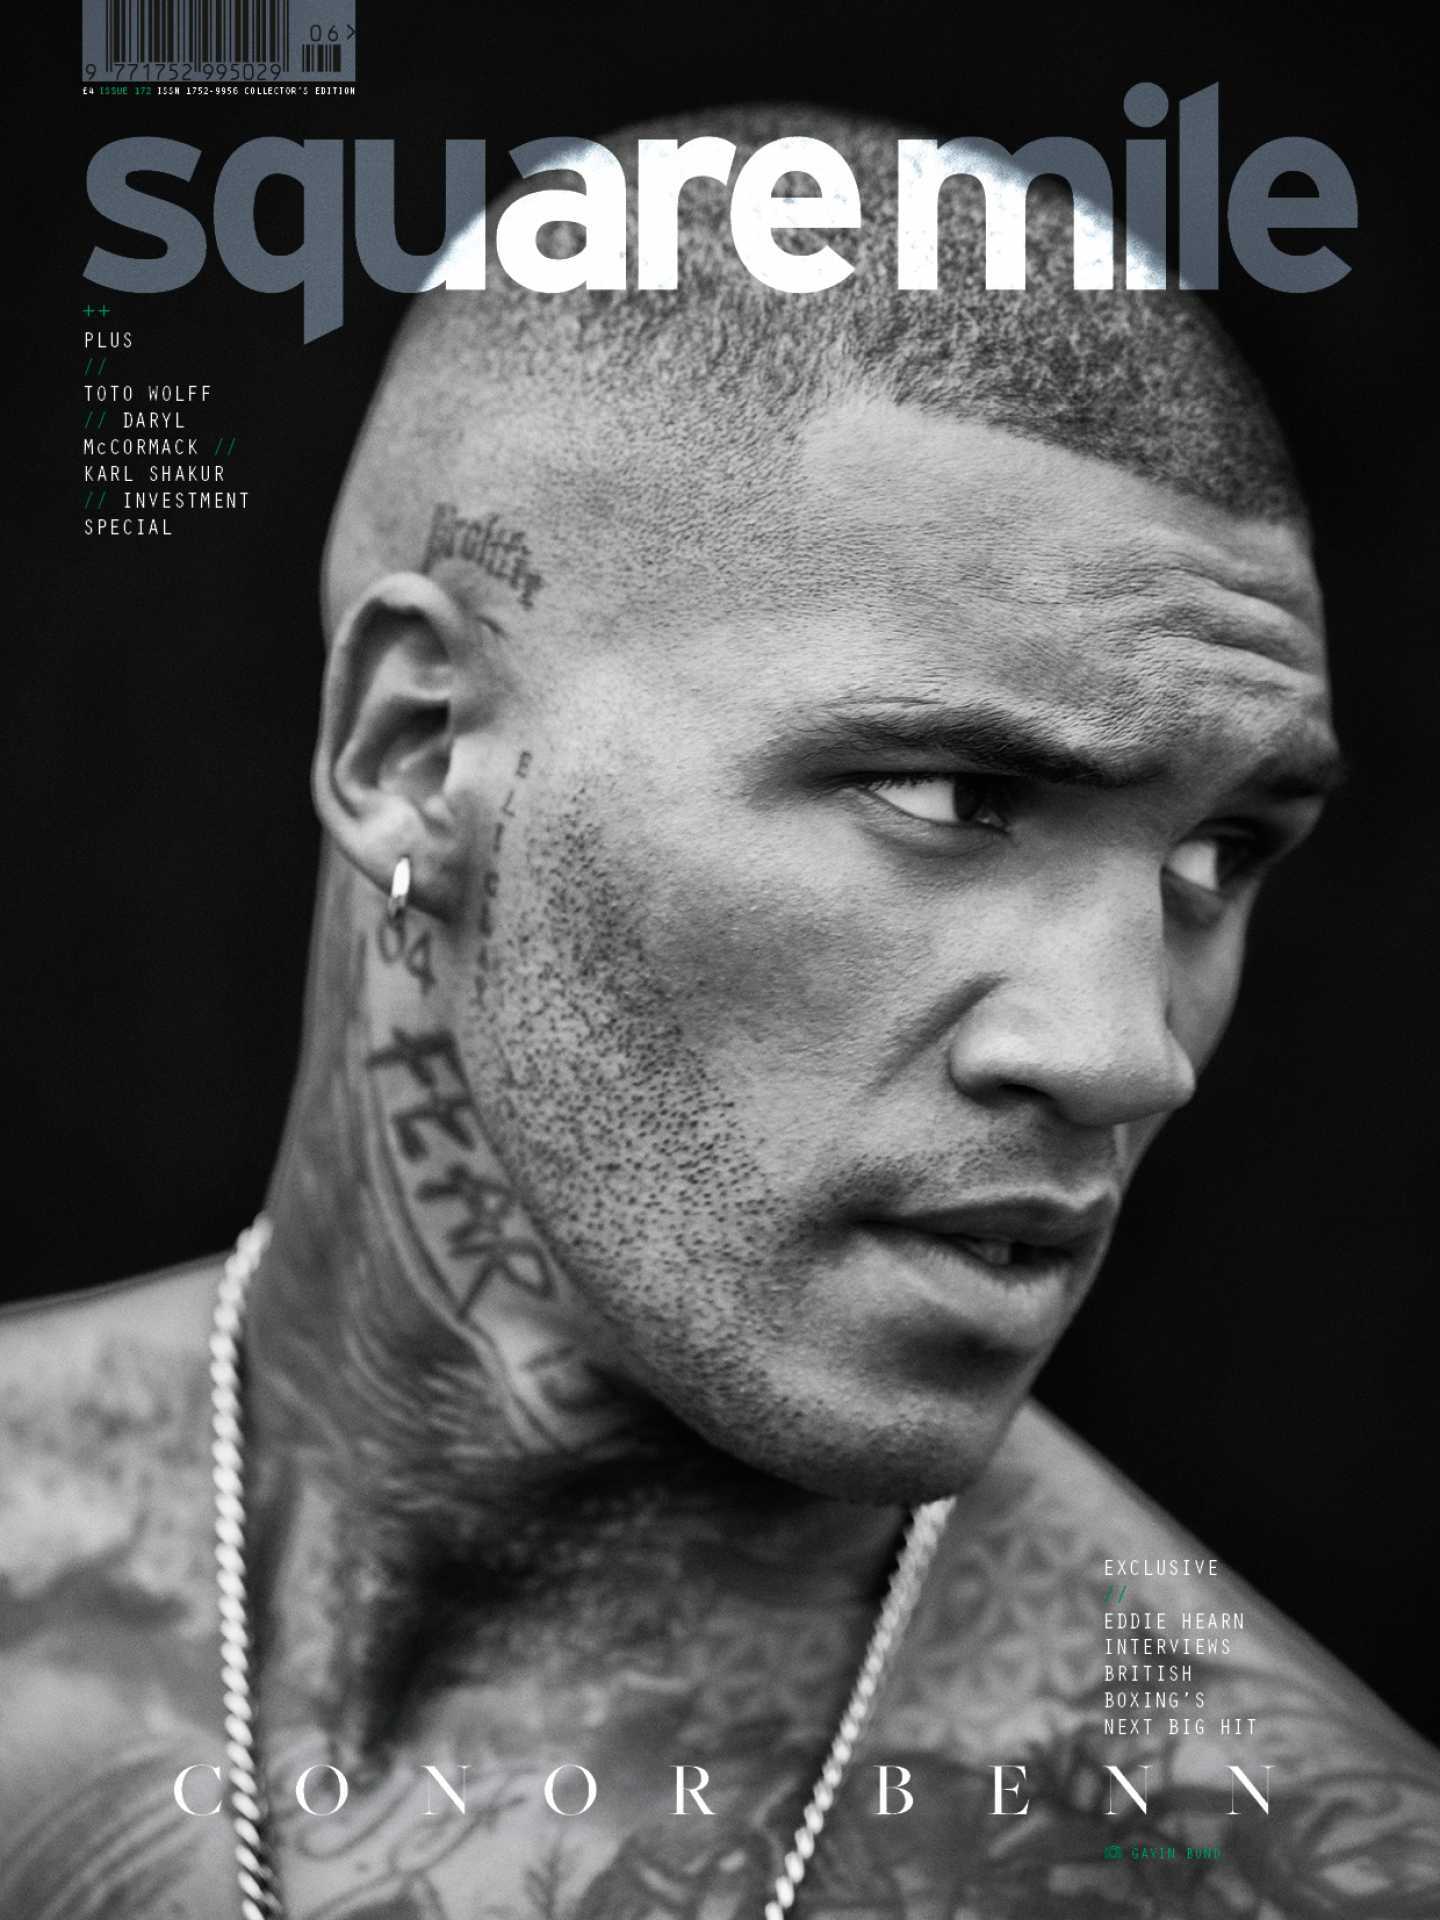 Conor Benn photographed by Gavin Bond for Square Mile